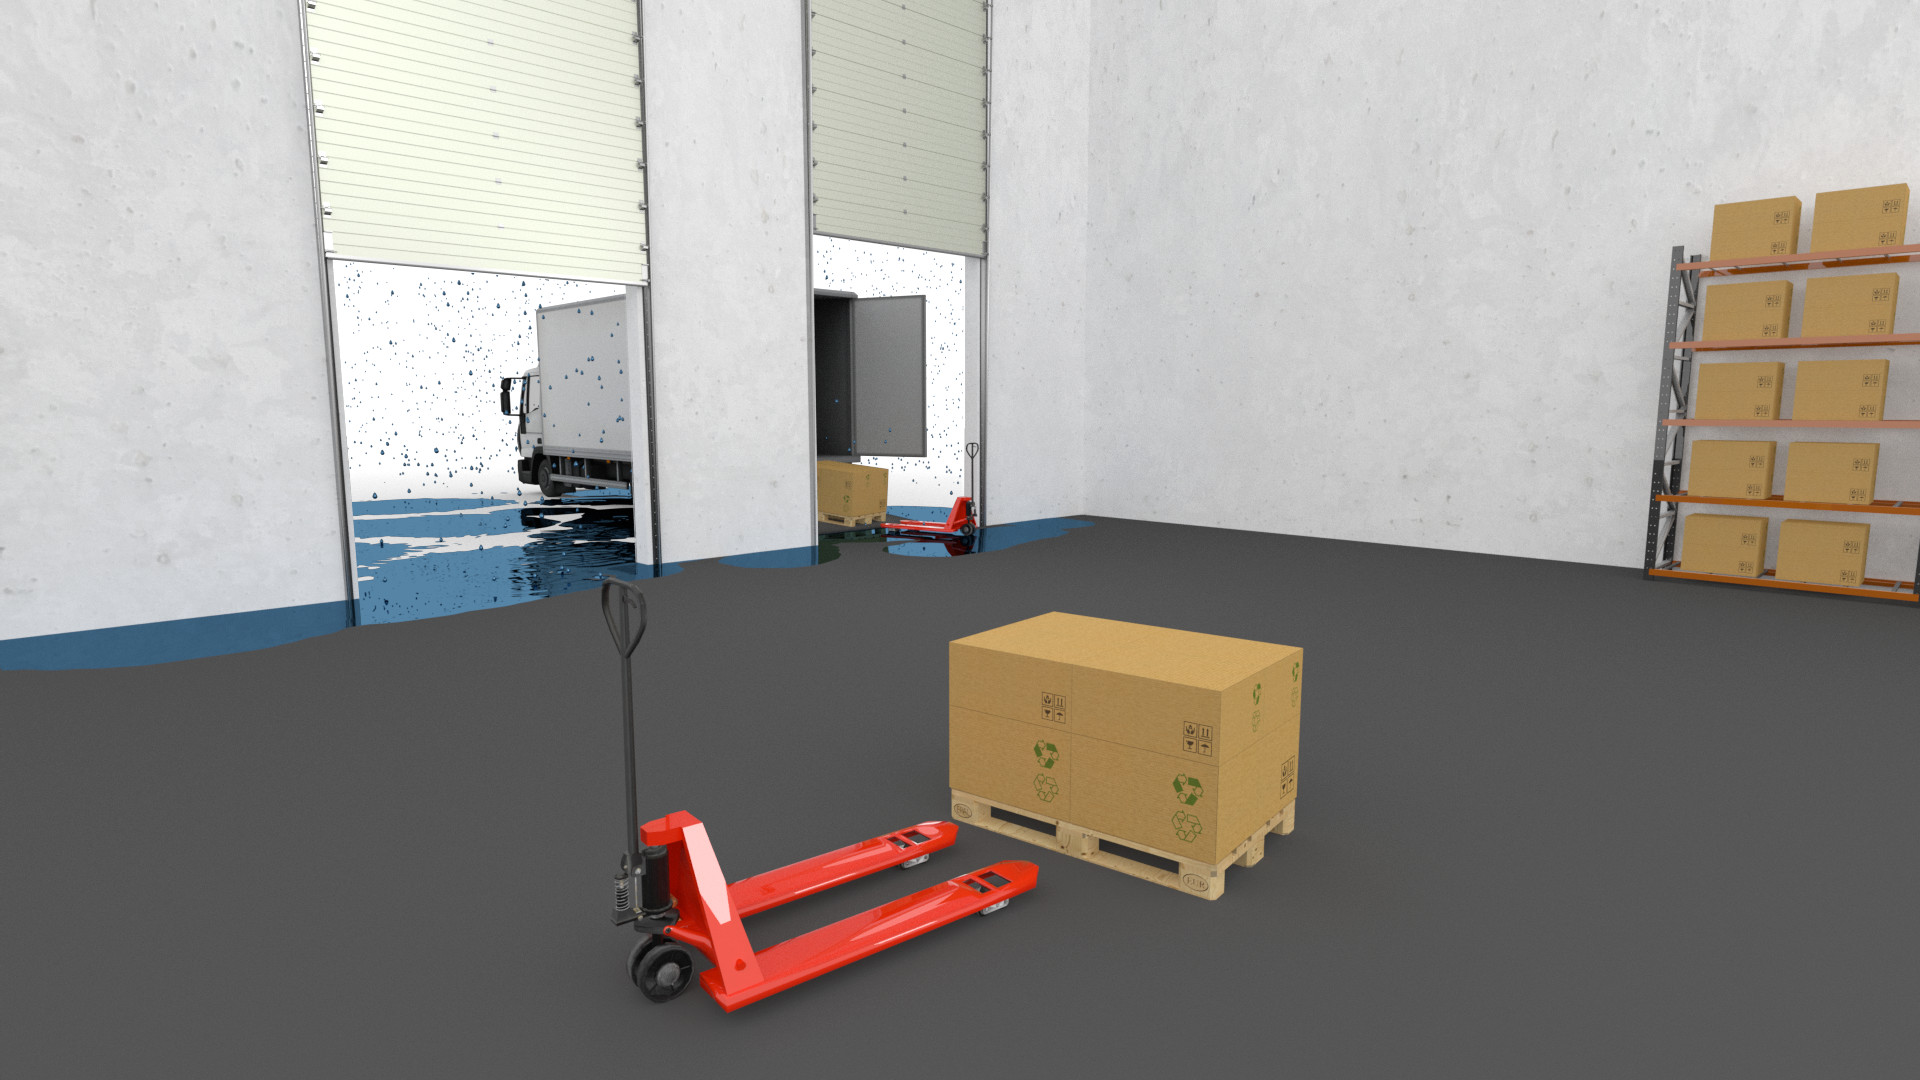 Loading at ground level - only with lift truck